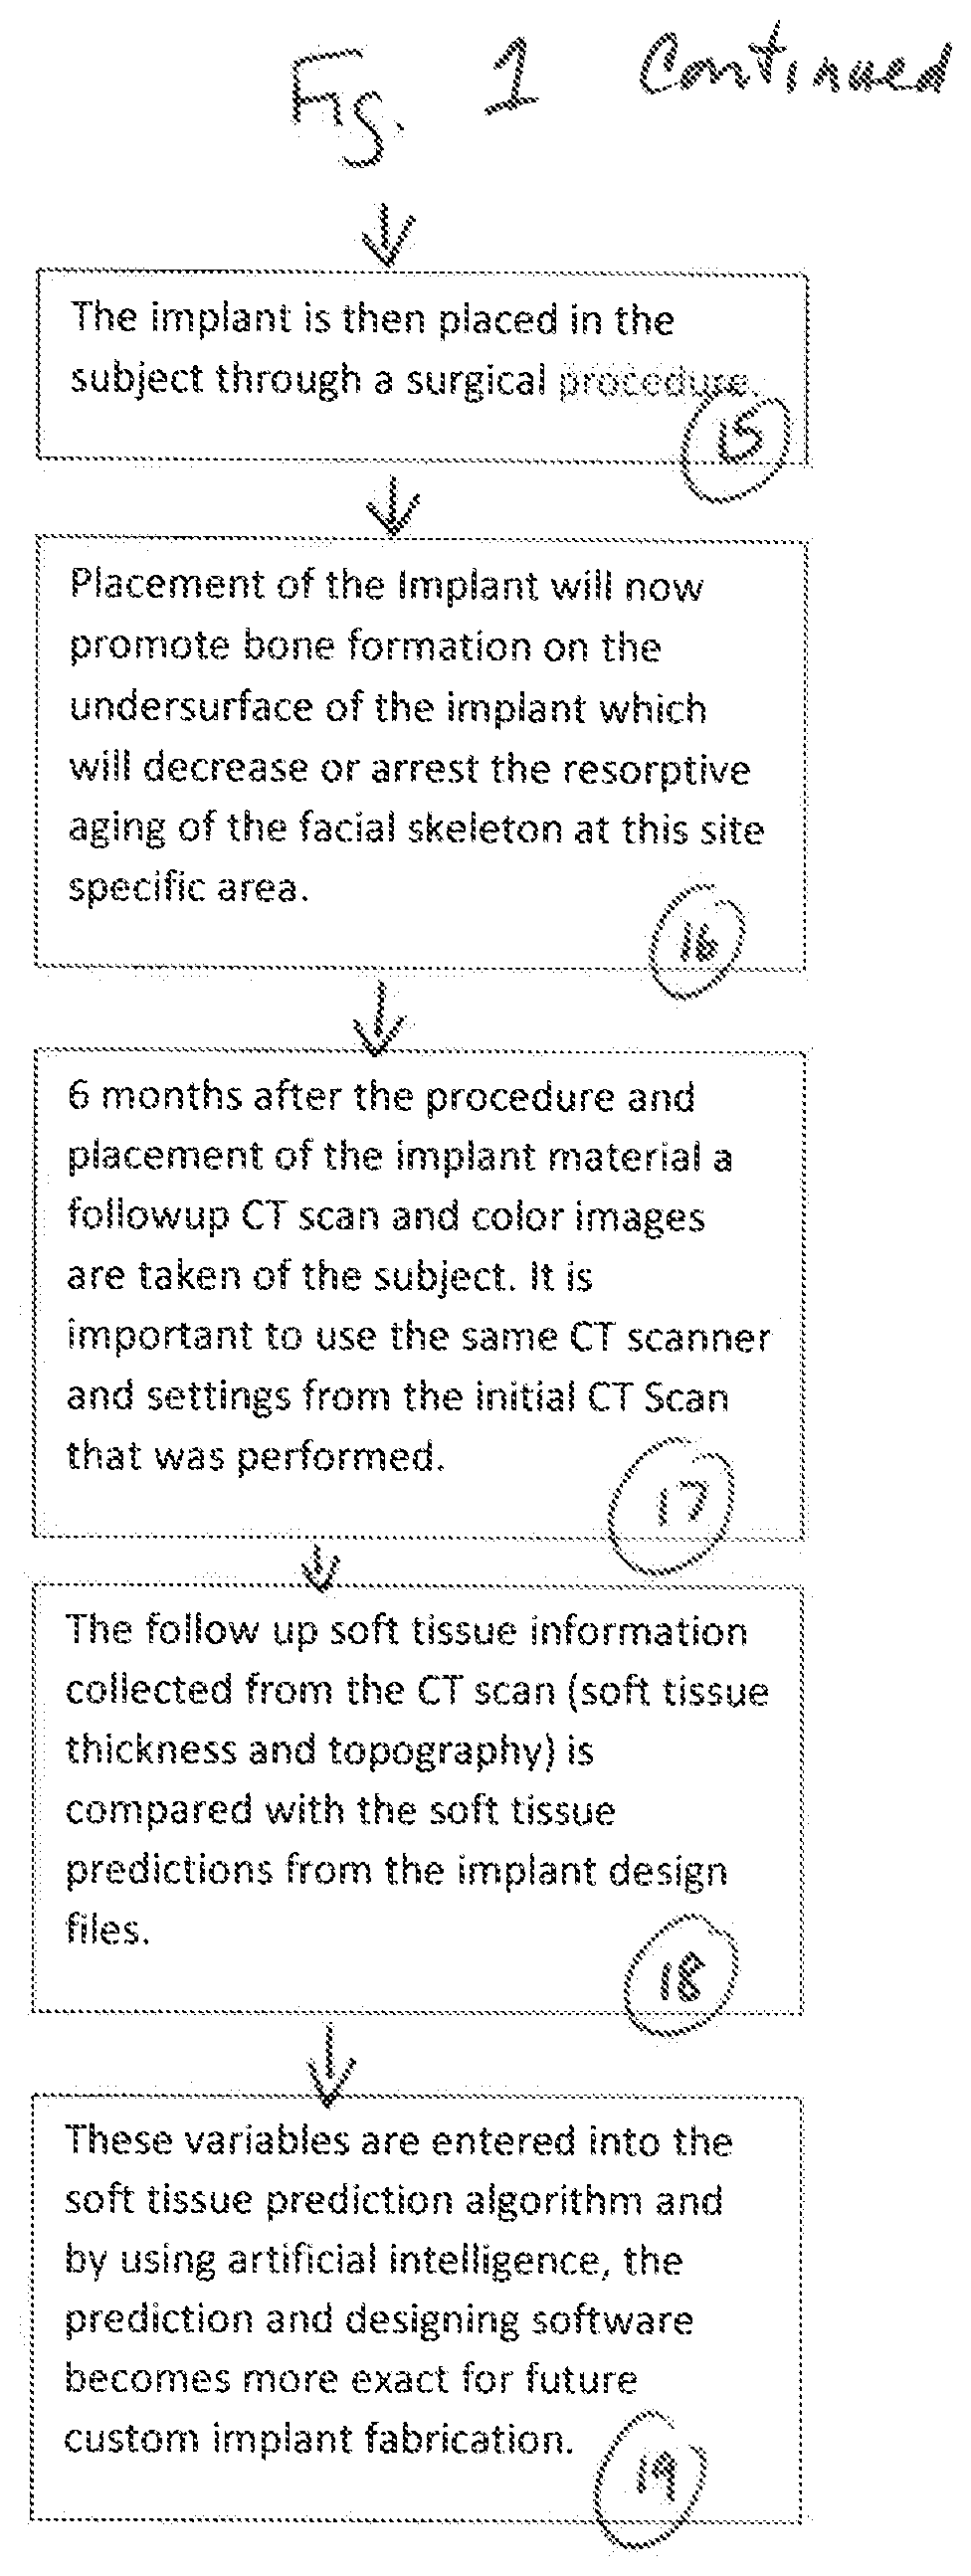 Method using custom patient specific implants to decrease the natural rate of aging site specific regions of the facial skeleton